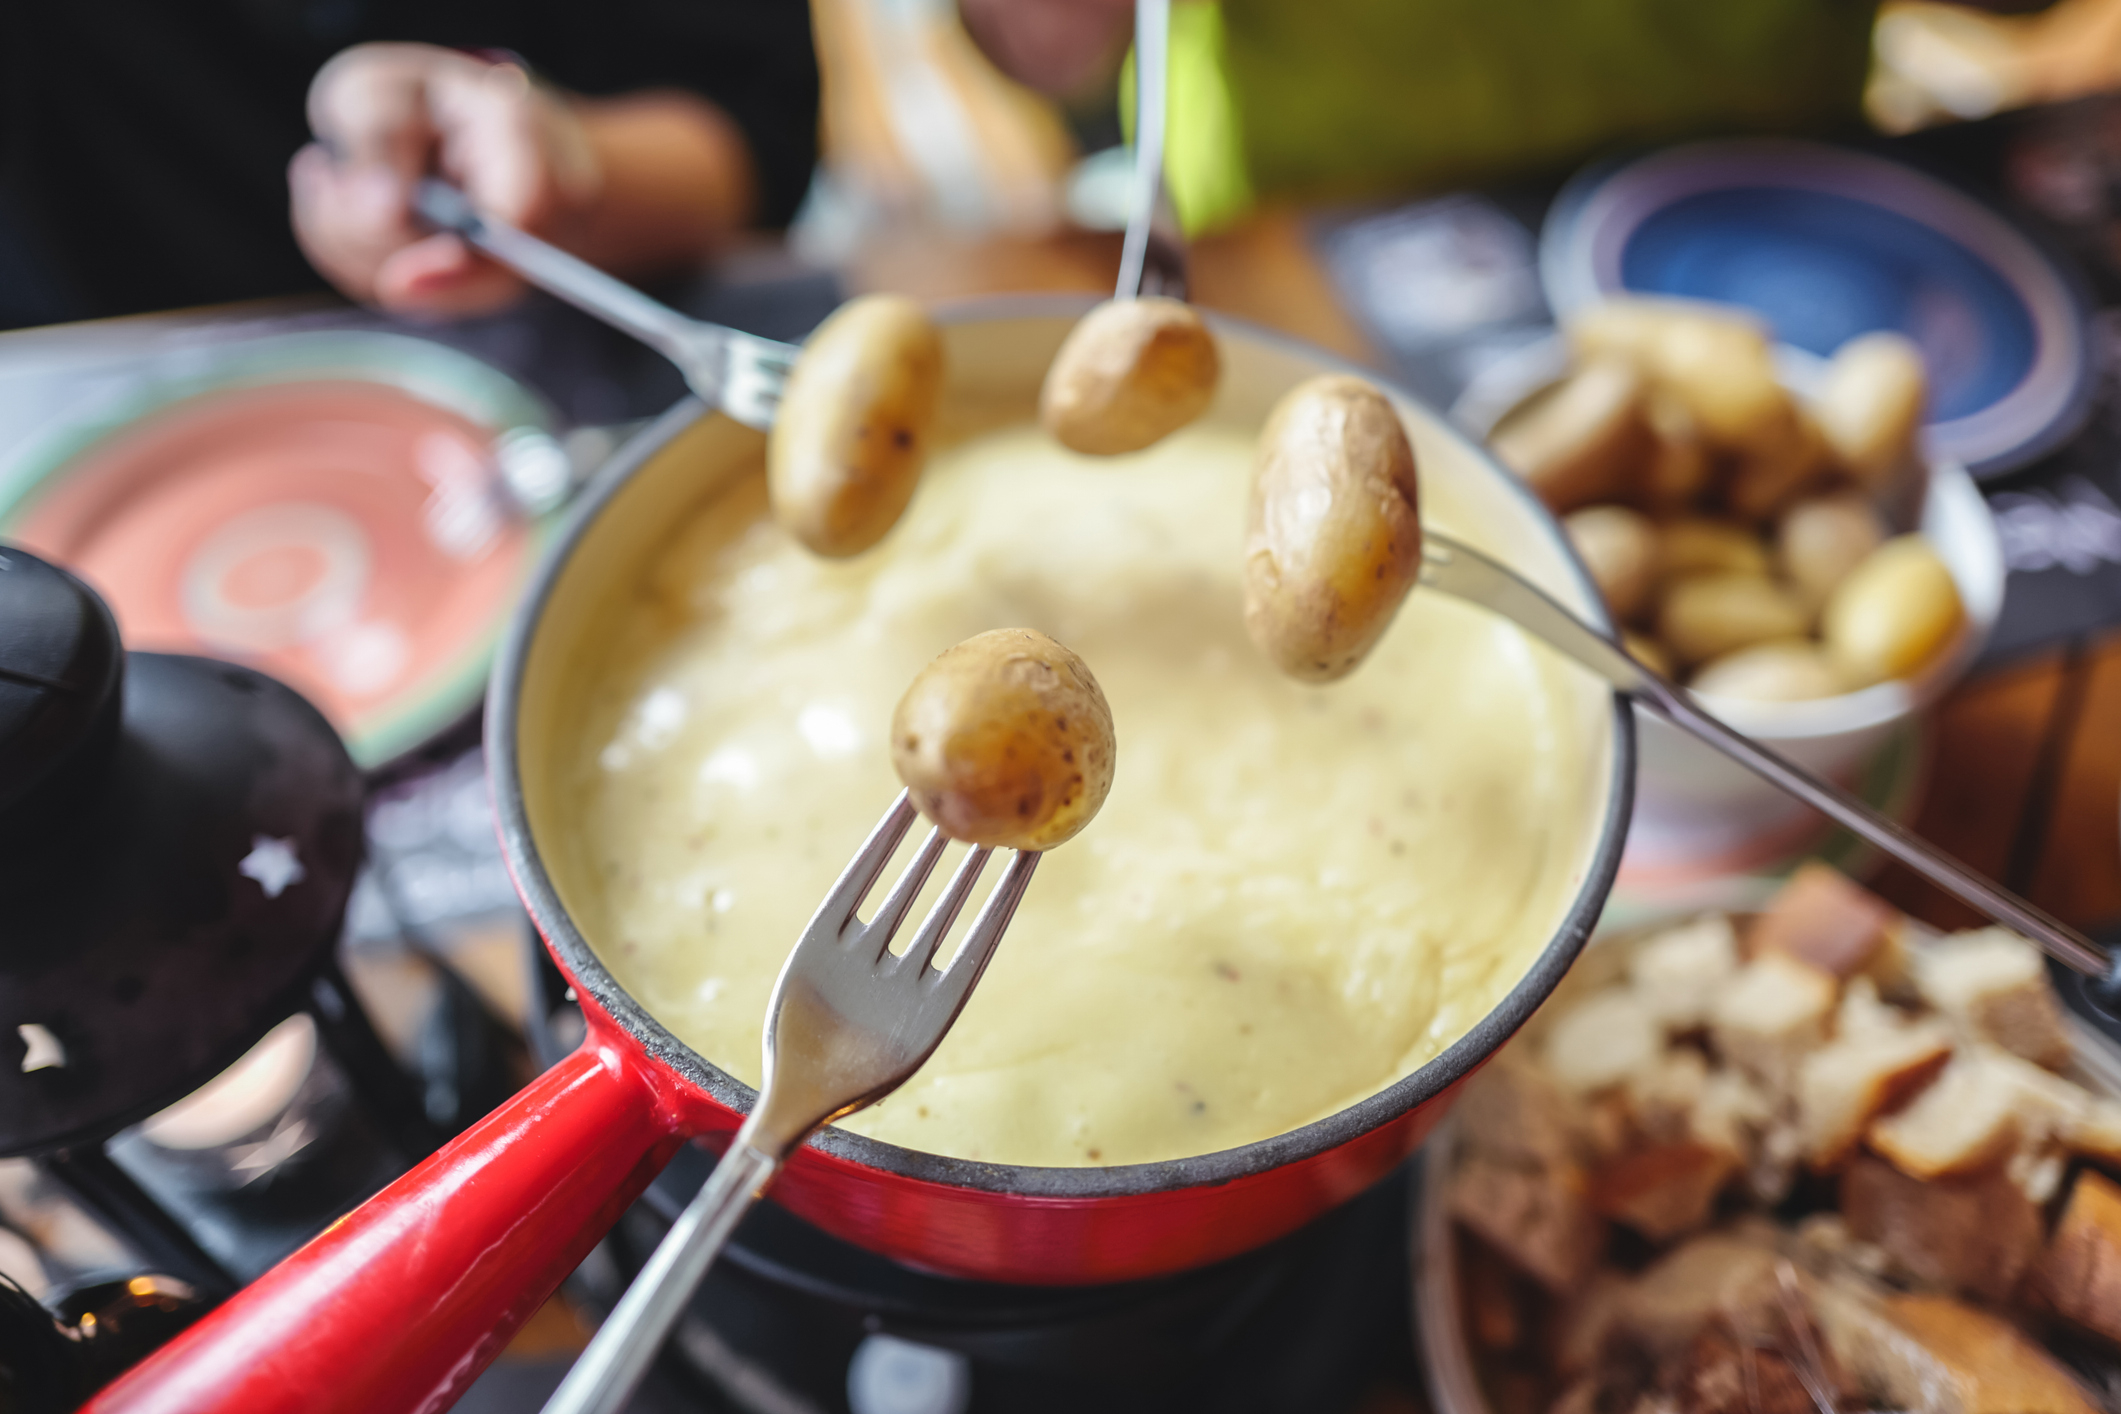 A person dipping a potato onto a fork into a pot of fondue with plates of food surrounding it